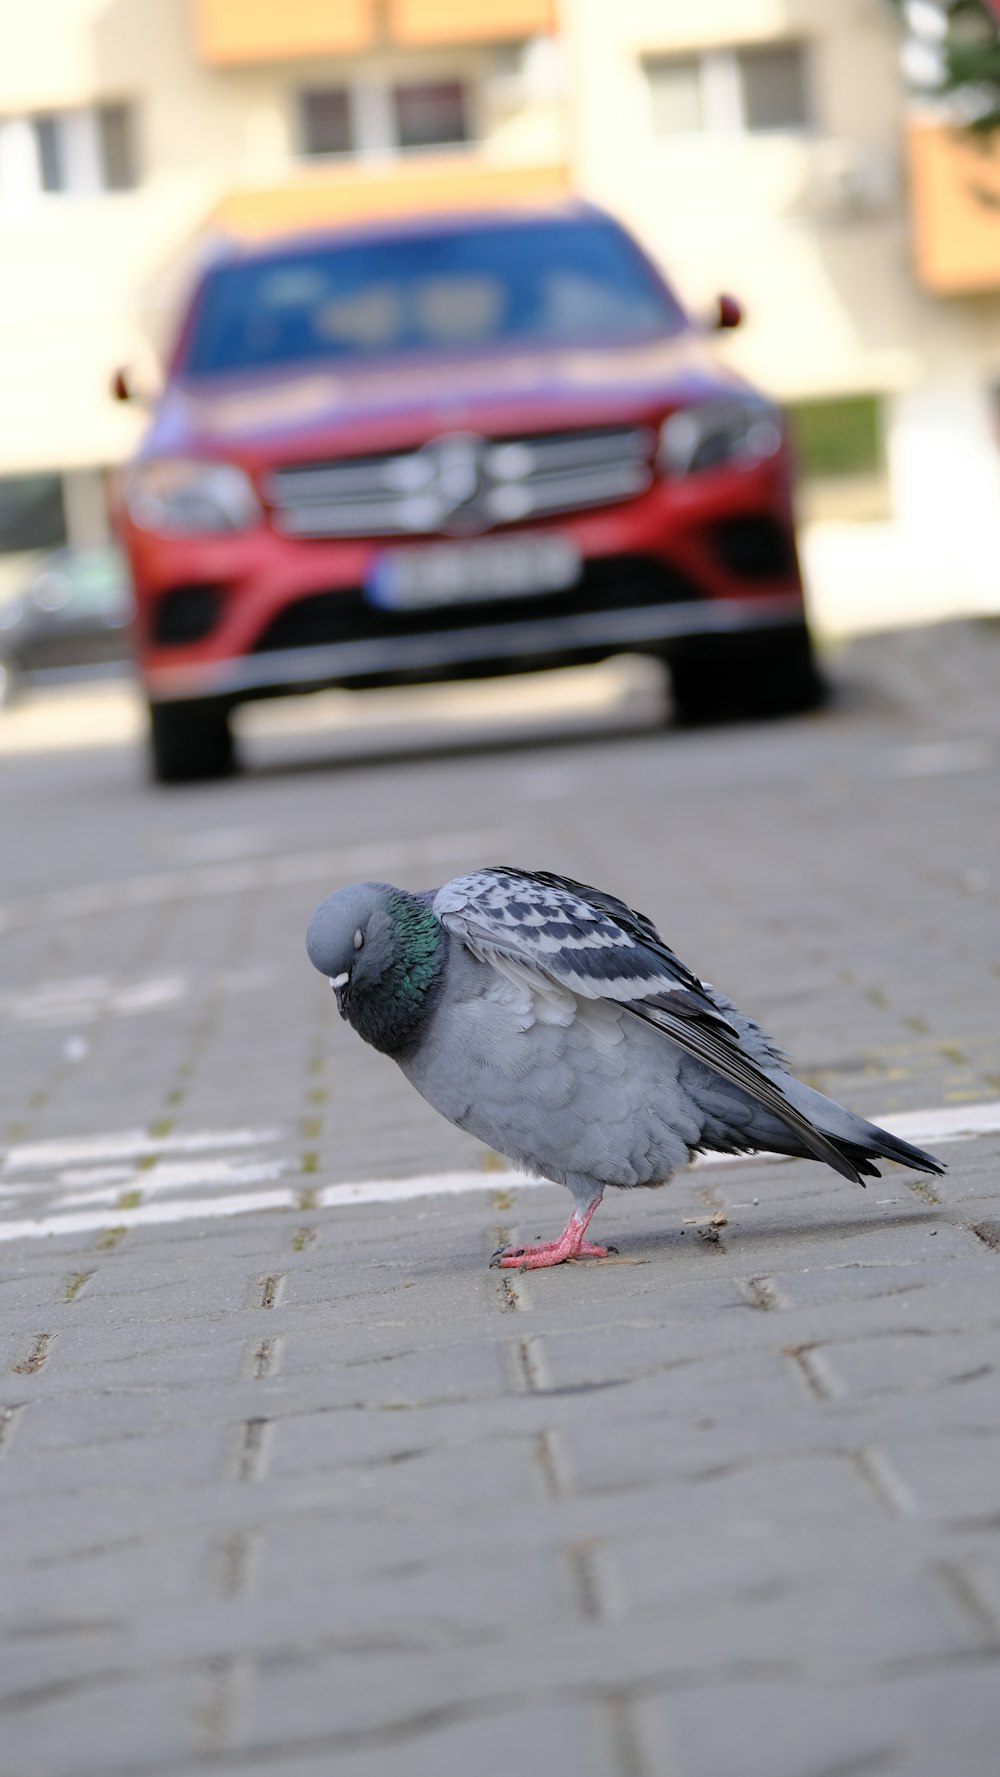 a pigeon is standing on the sidewalk next to a red car